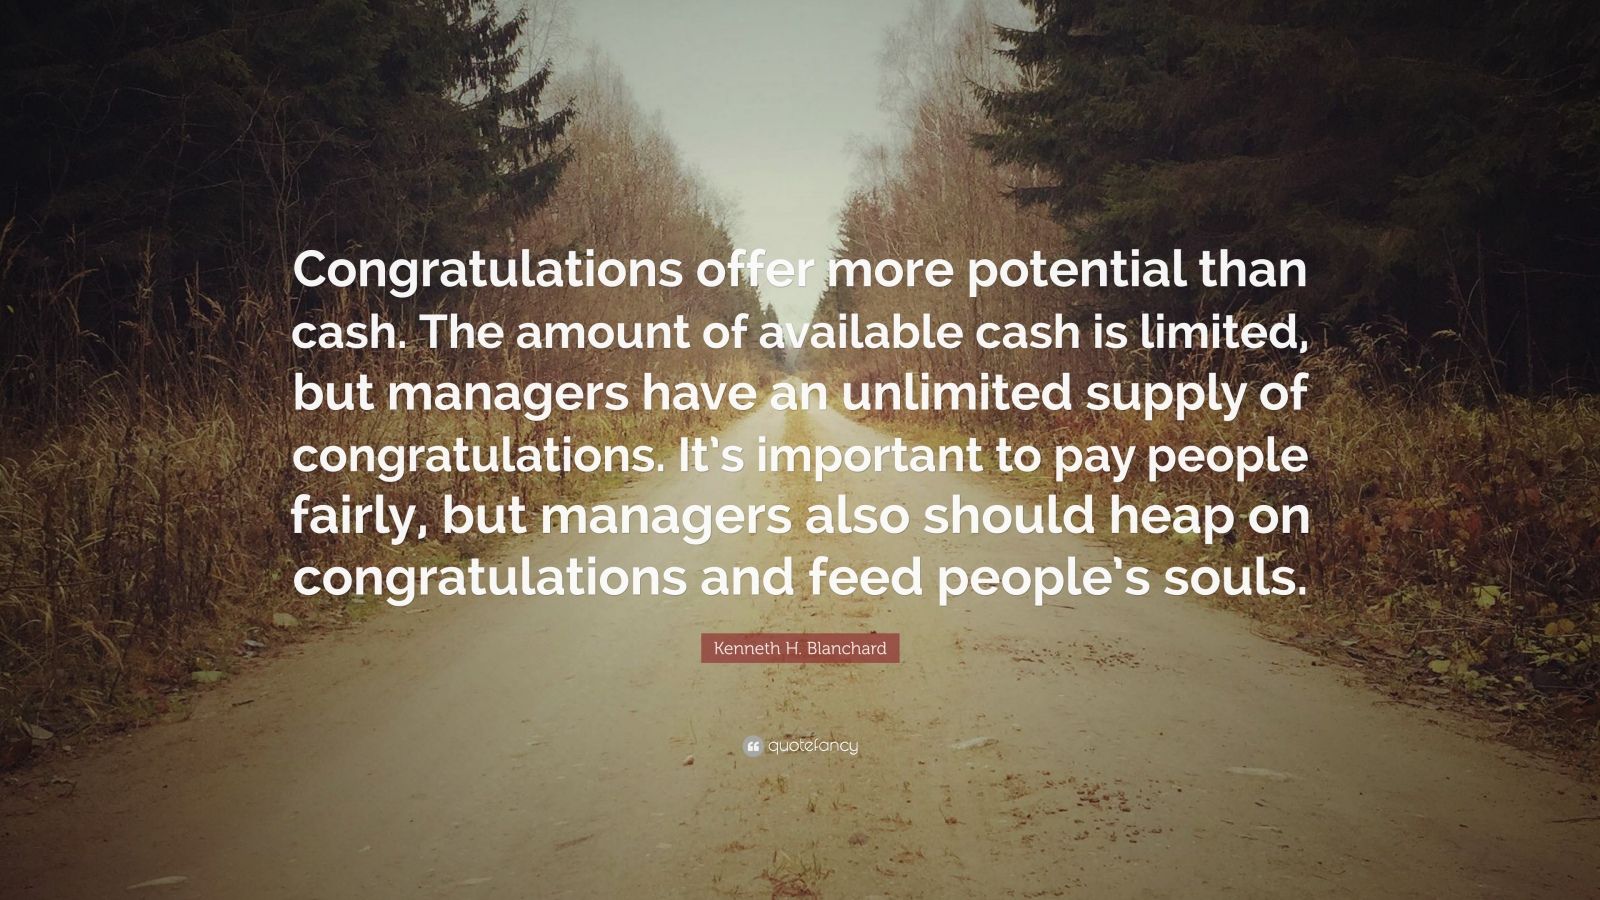 Kenneth H. Blanchard Quote: "Congratulations offer more ...